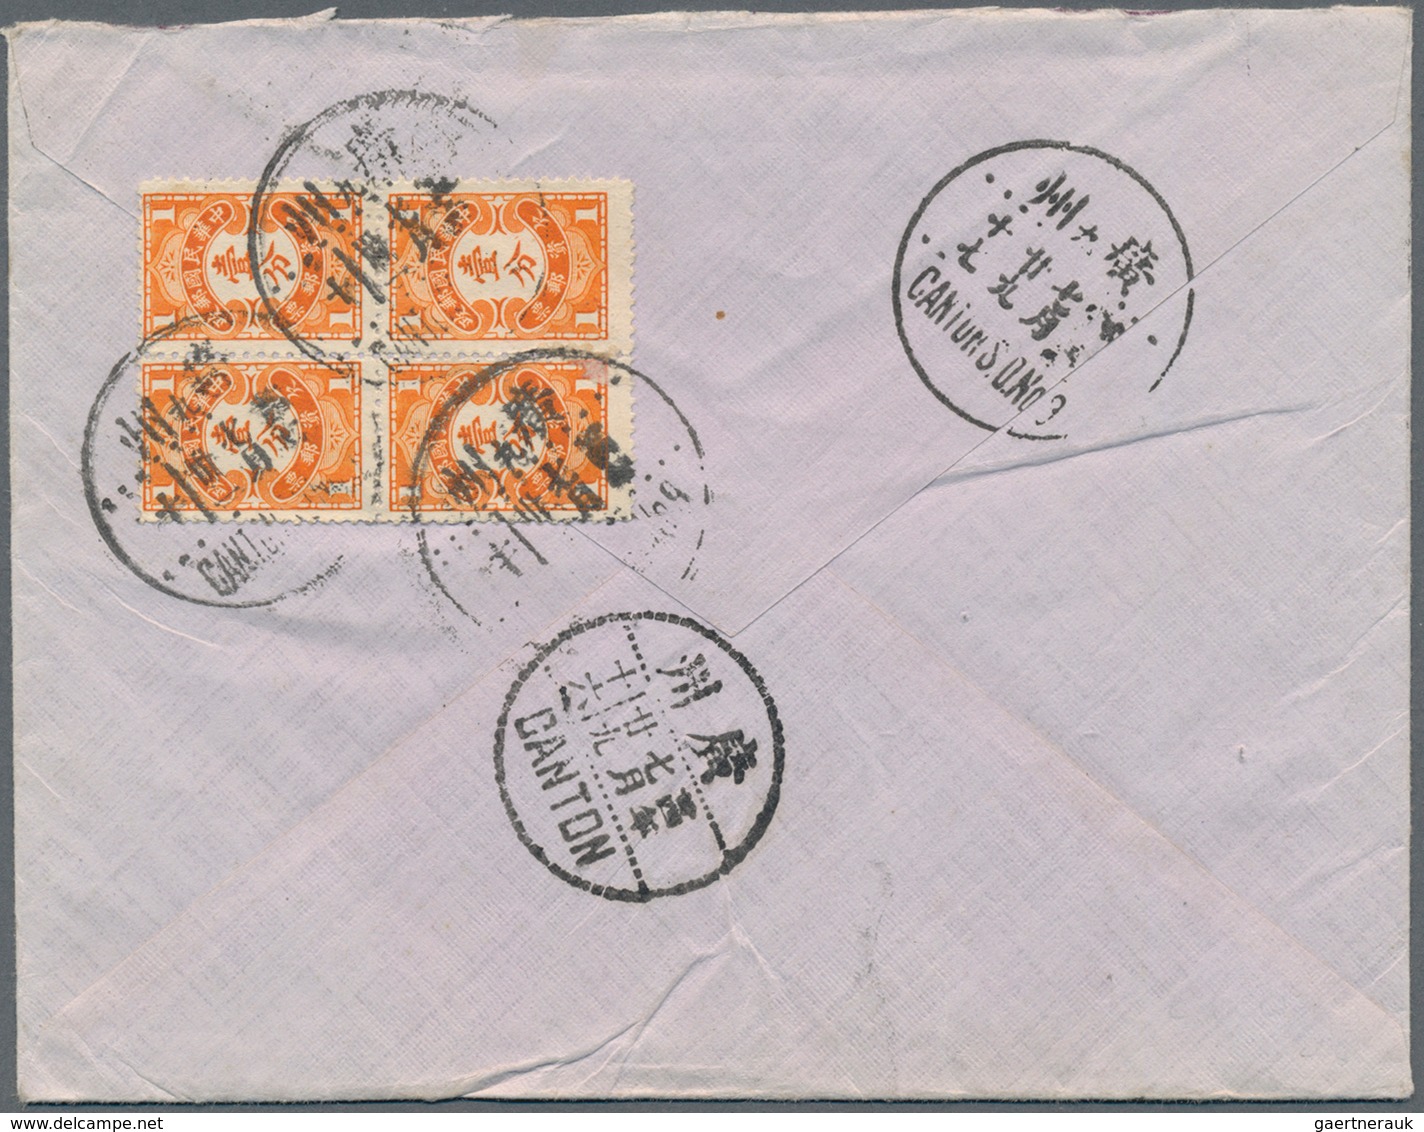 China - Portomarken: 1935, 1c. Orange Block Of Four Postmarked "Canton" On Reverse Of Incoming Cover - Postage Due